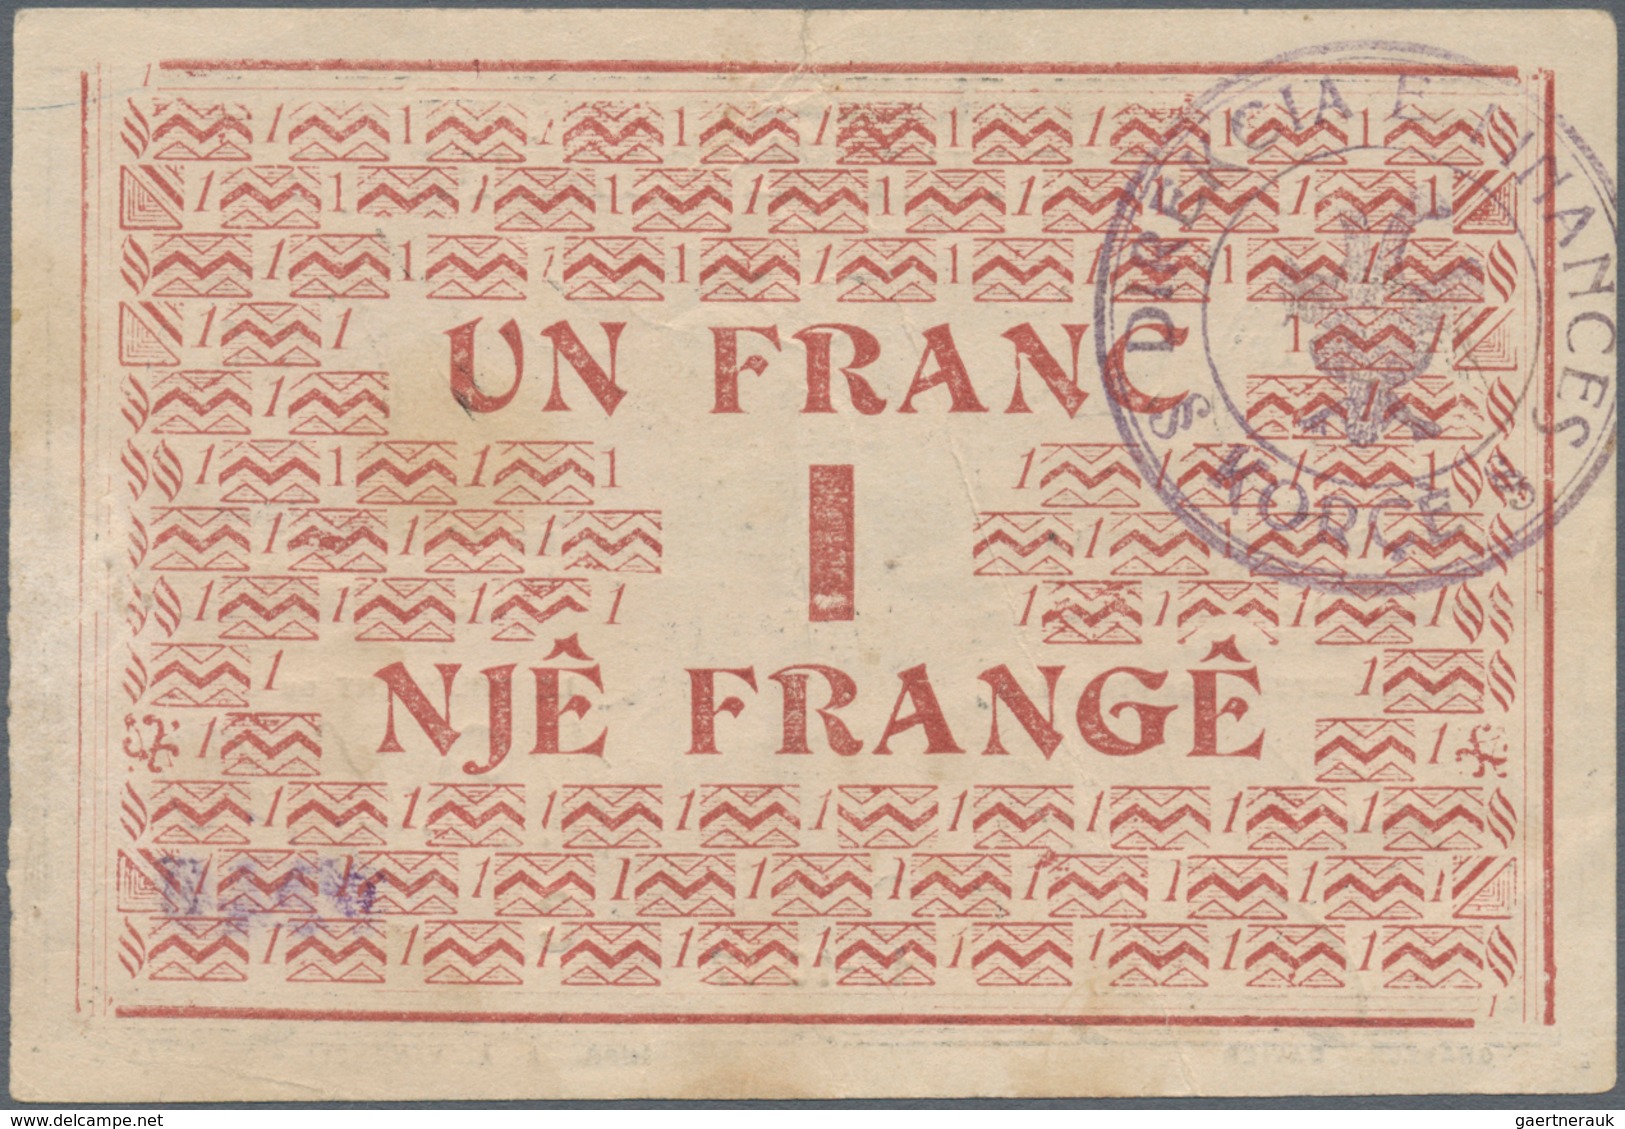 Albania / Albanien: 1 Frang 10.10.1917 P. S146, Used With One Vertical Fold And Light Handling / Din - Albanien